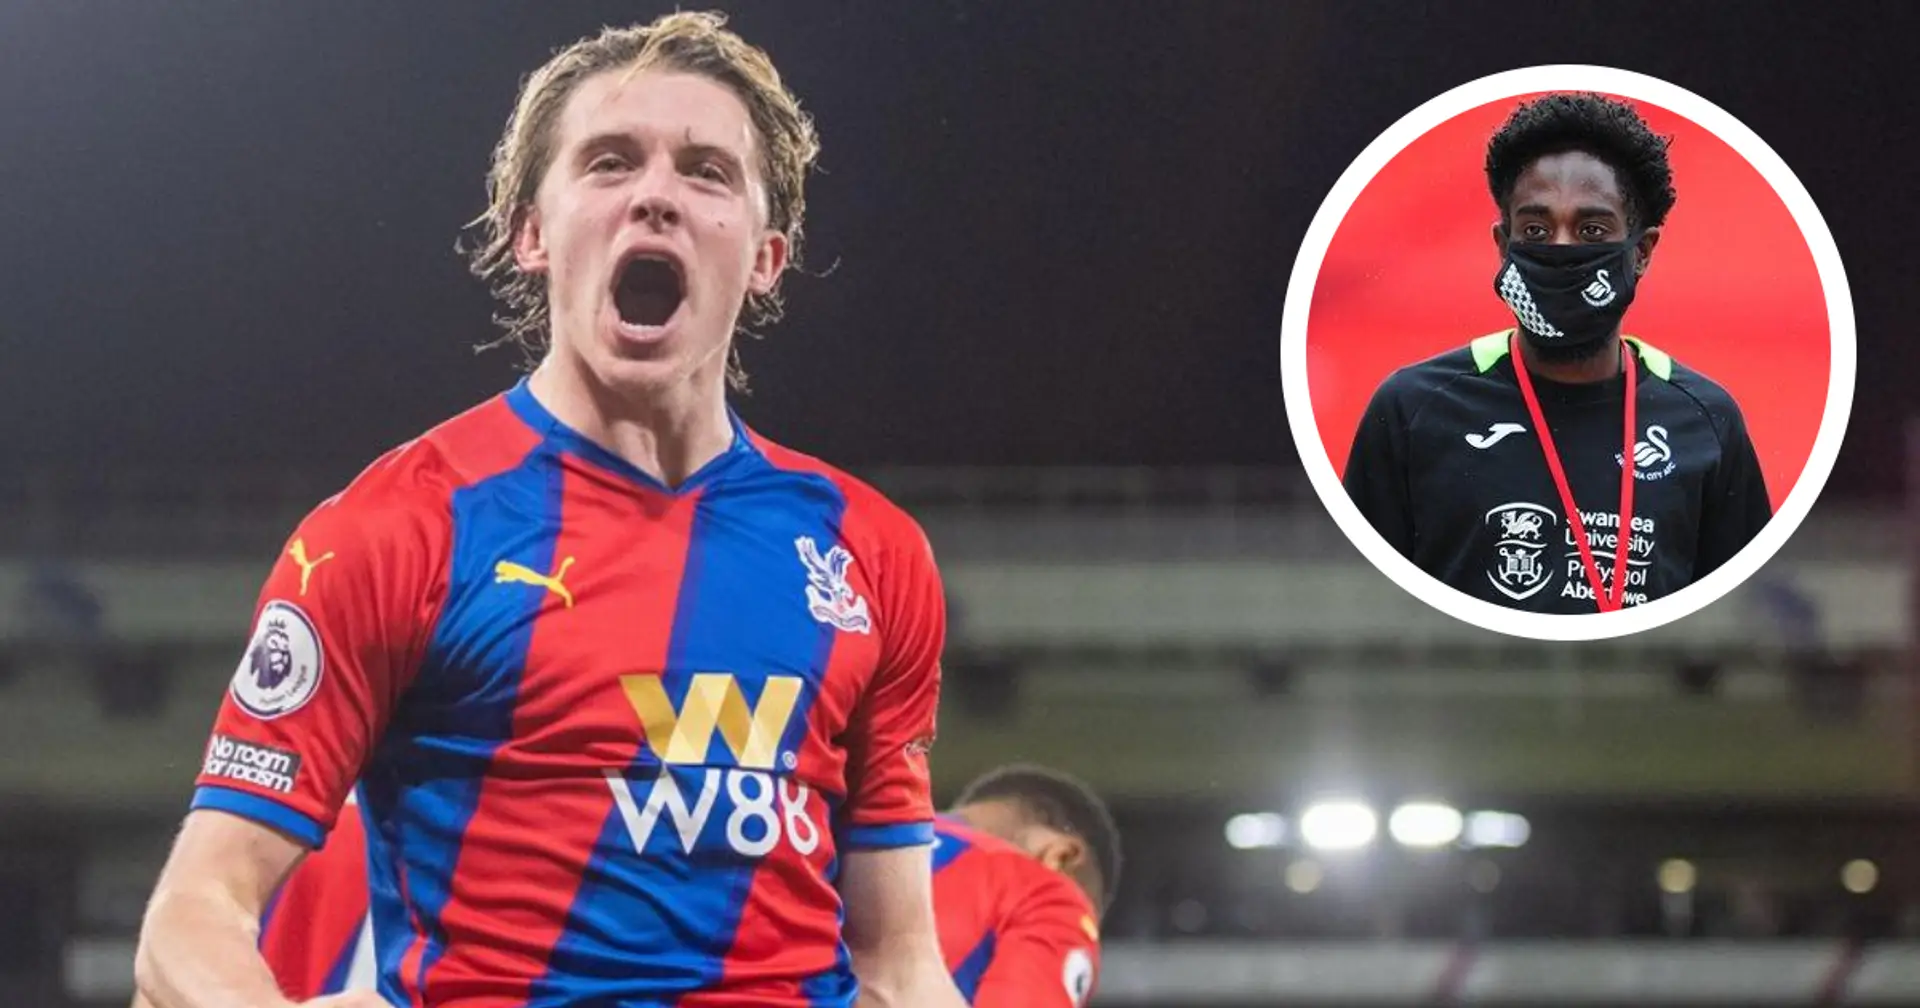 'One of the best I've ever seen': Ex-PL player Nathan Dyer points out key factor that makes Conor Gallagher so good